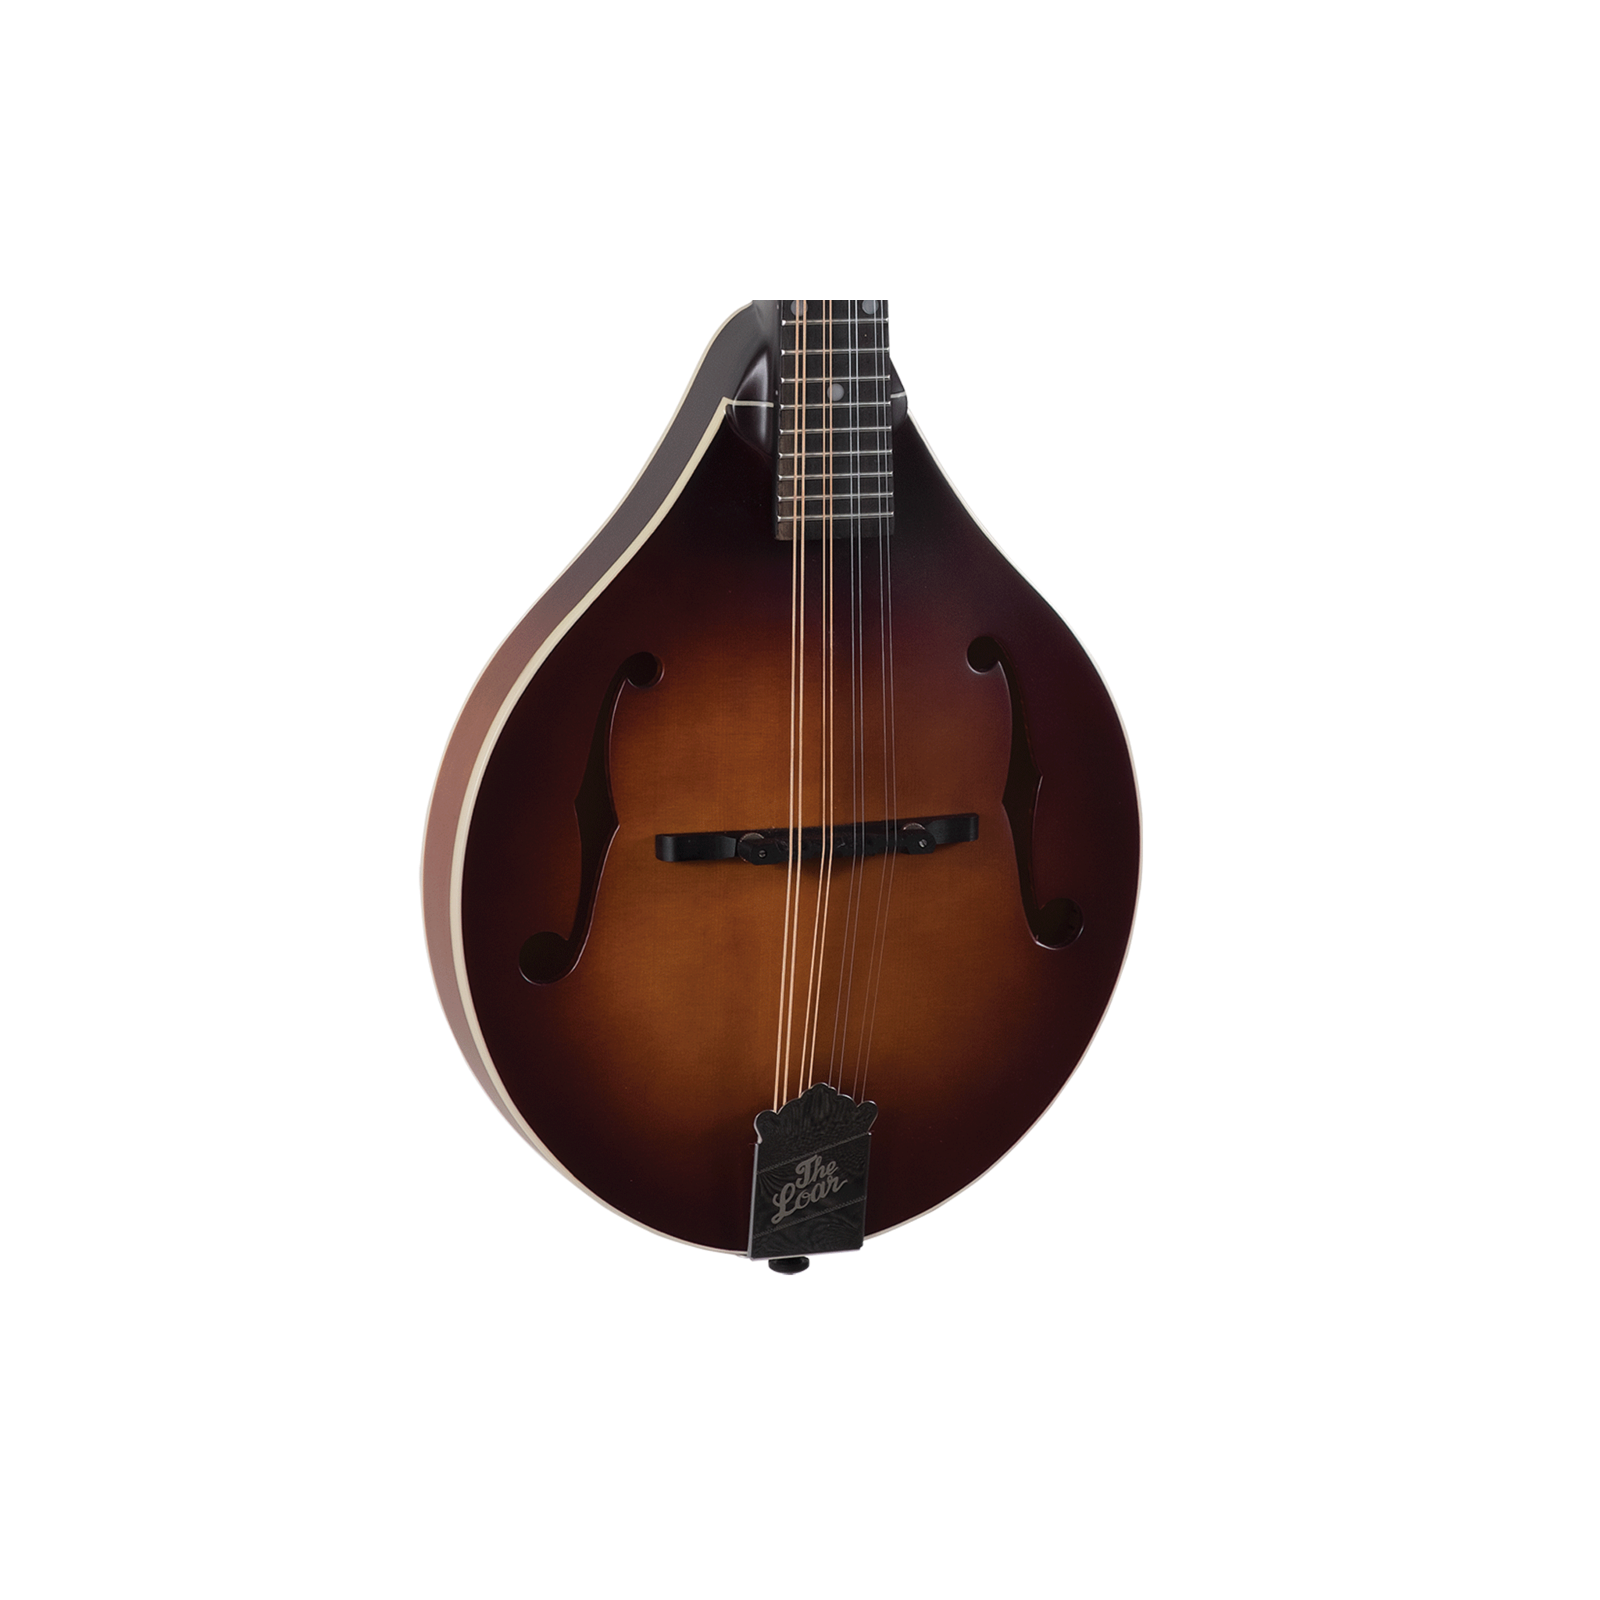 The Loar A-Style Mandolin Solid Top